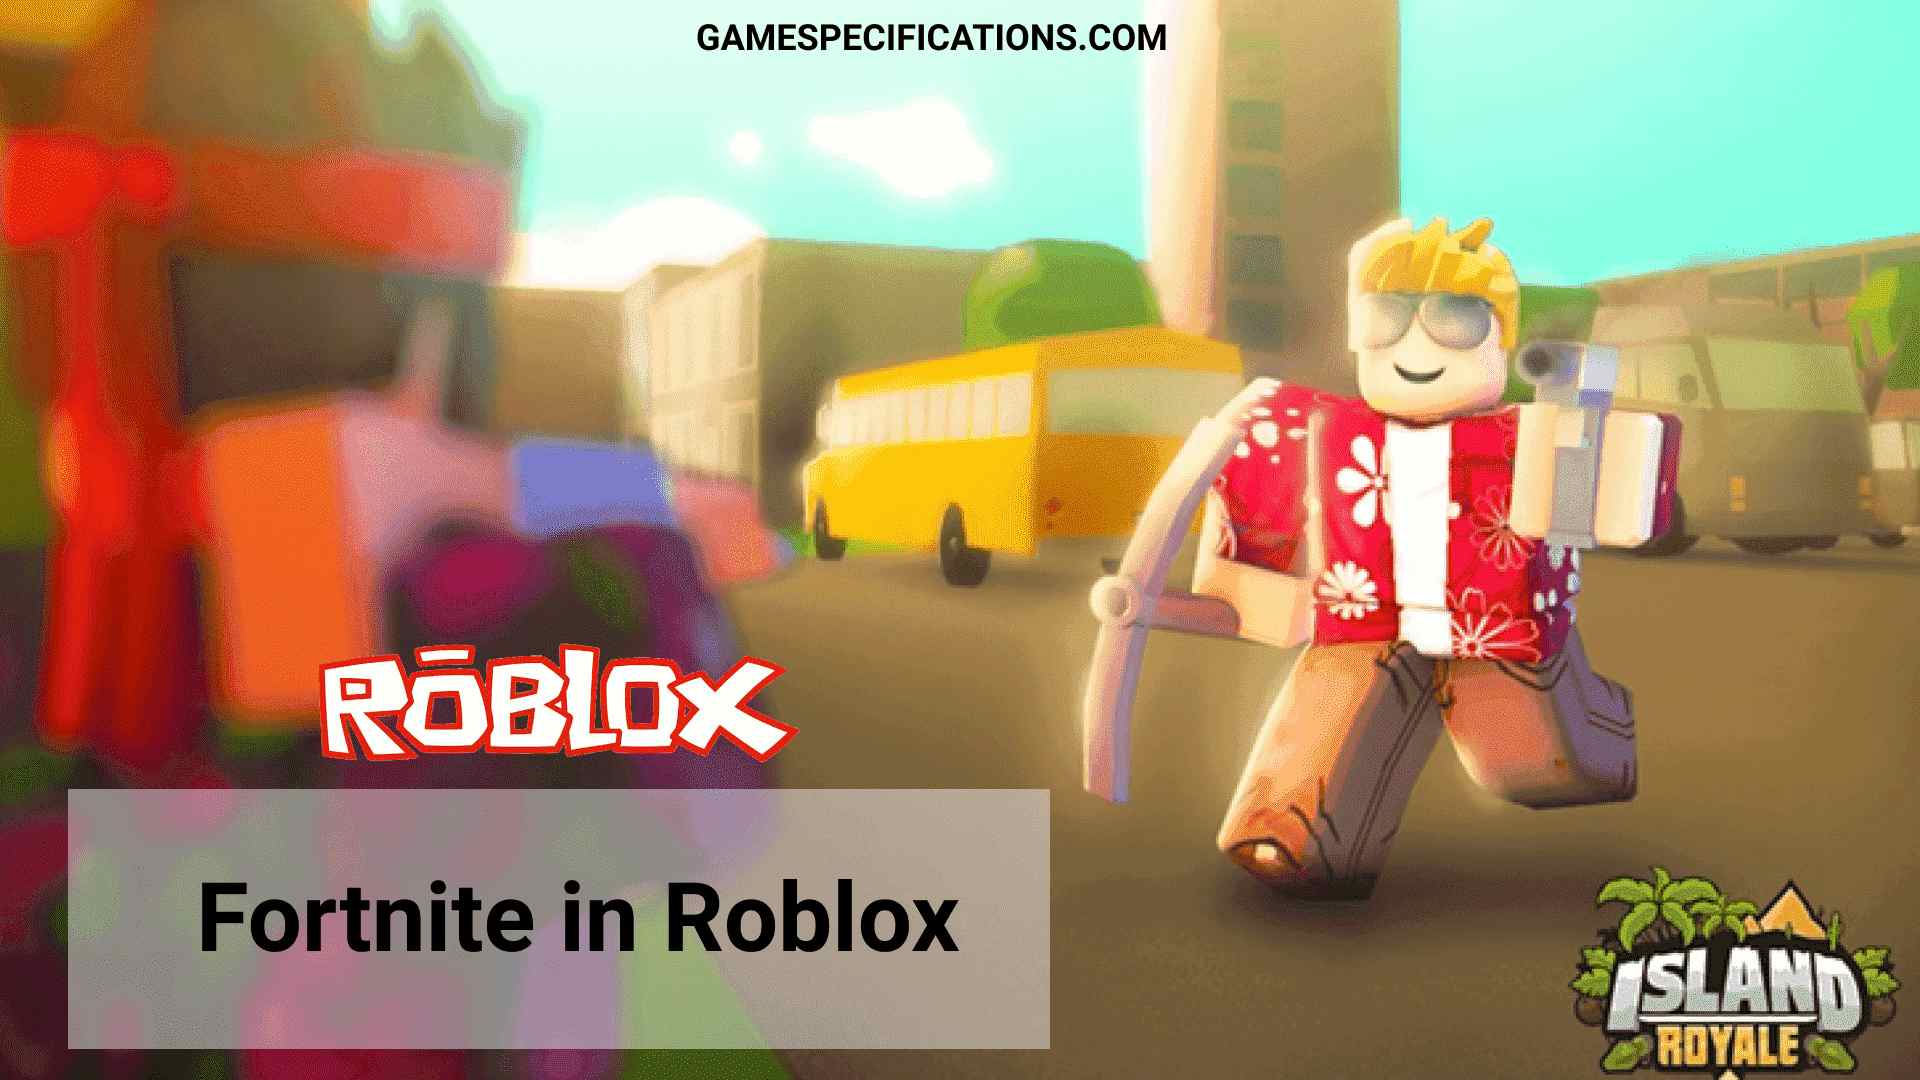 Fortnite Roblox A Native Battle Royale Game Specifications - roblox fortnite with building